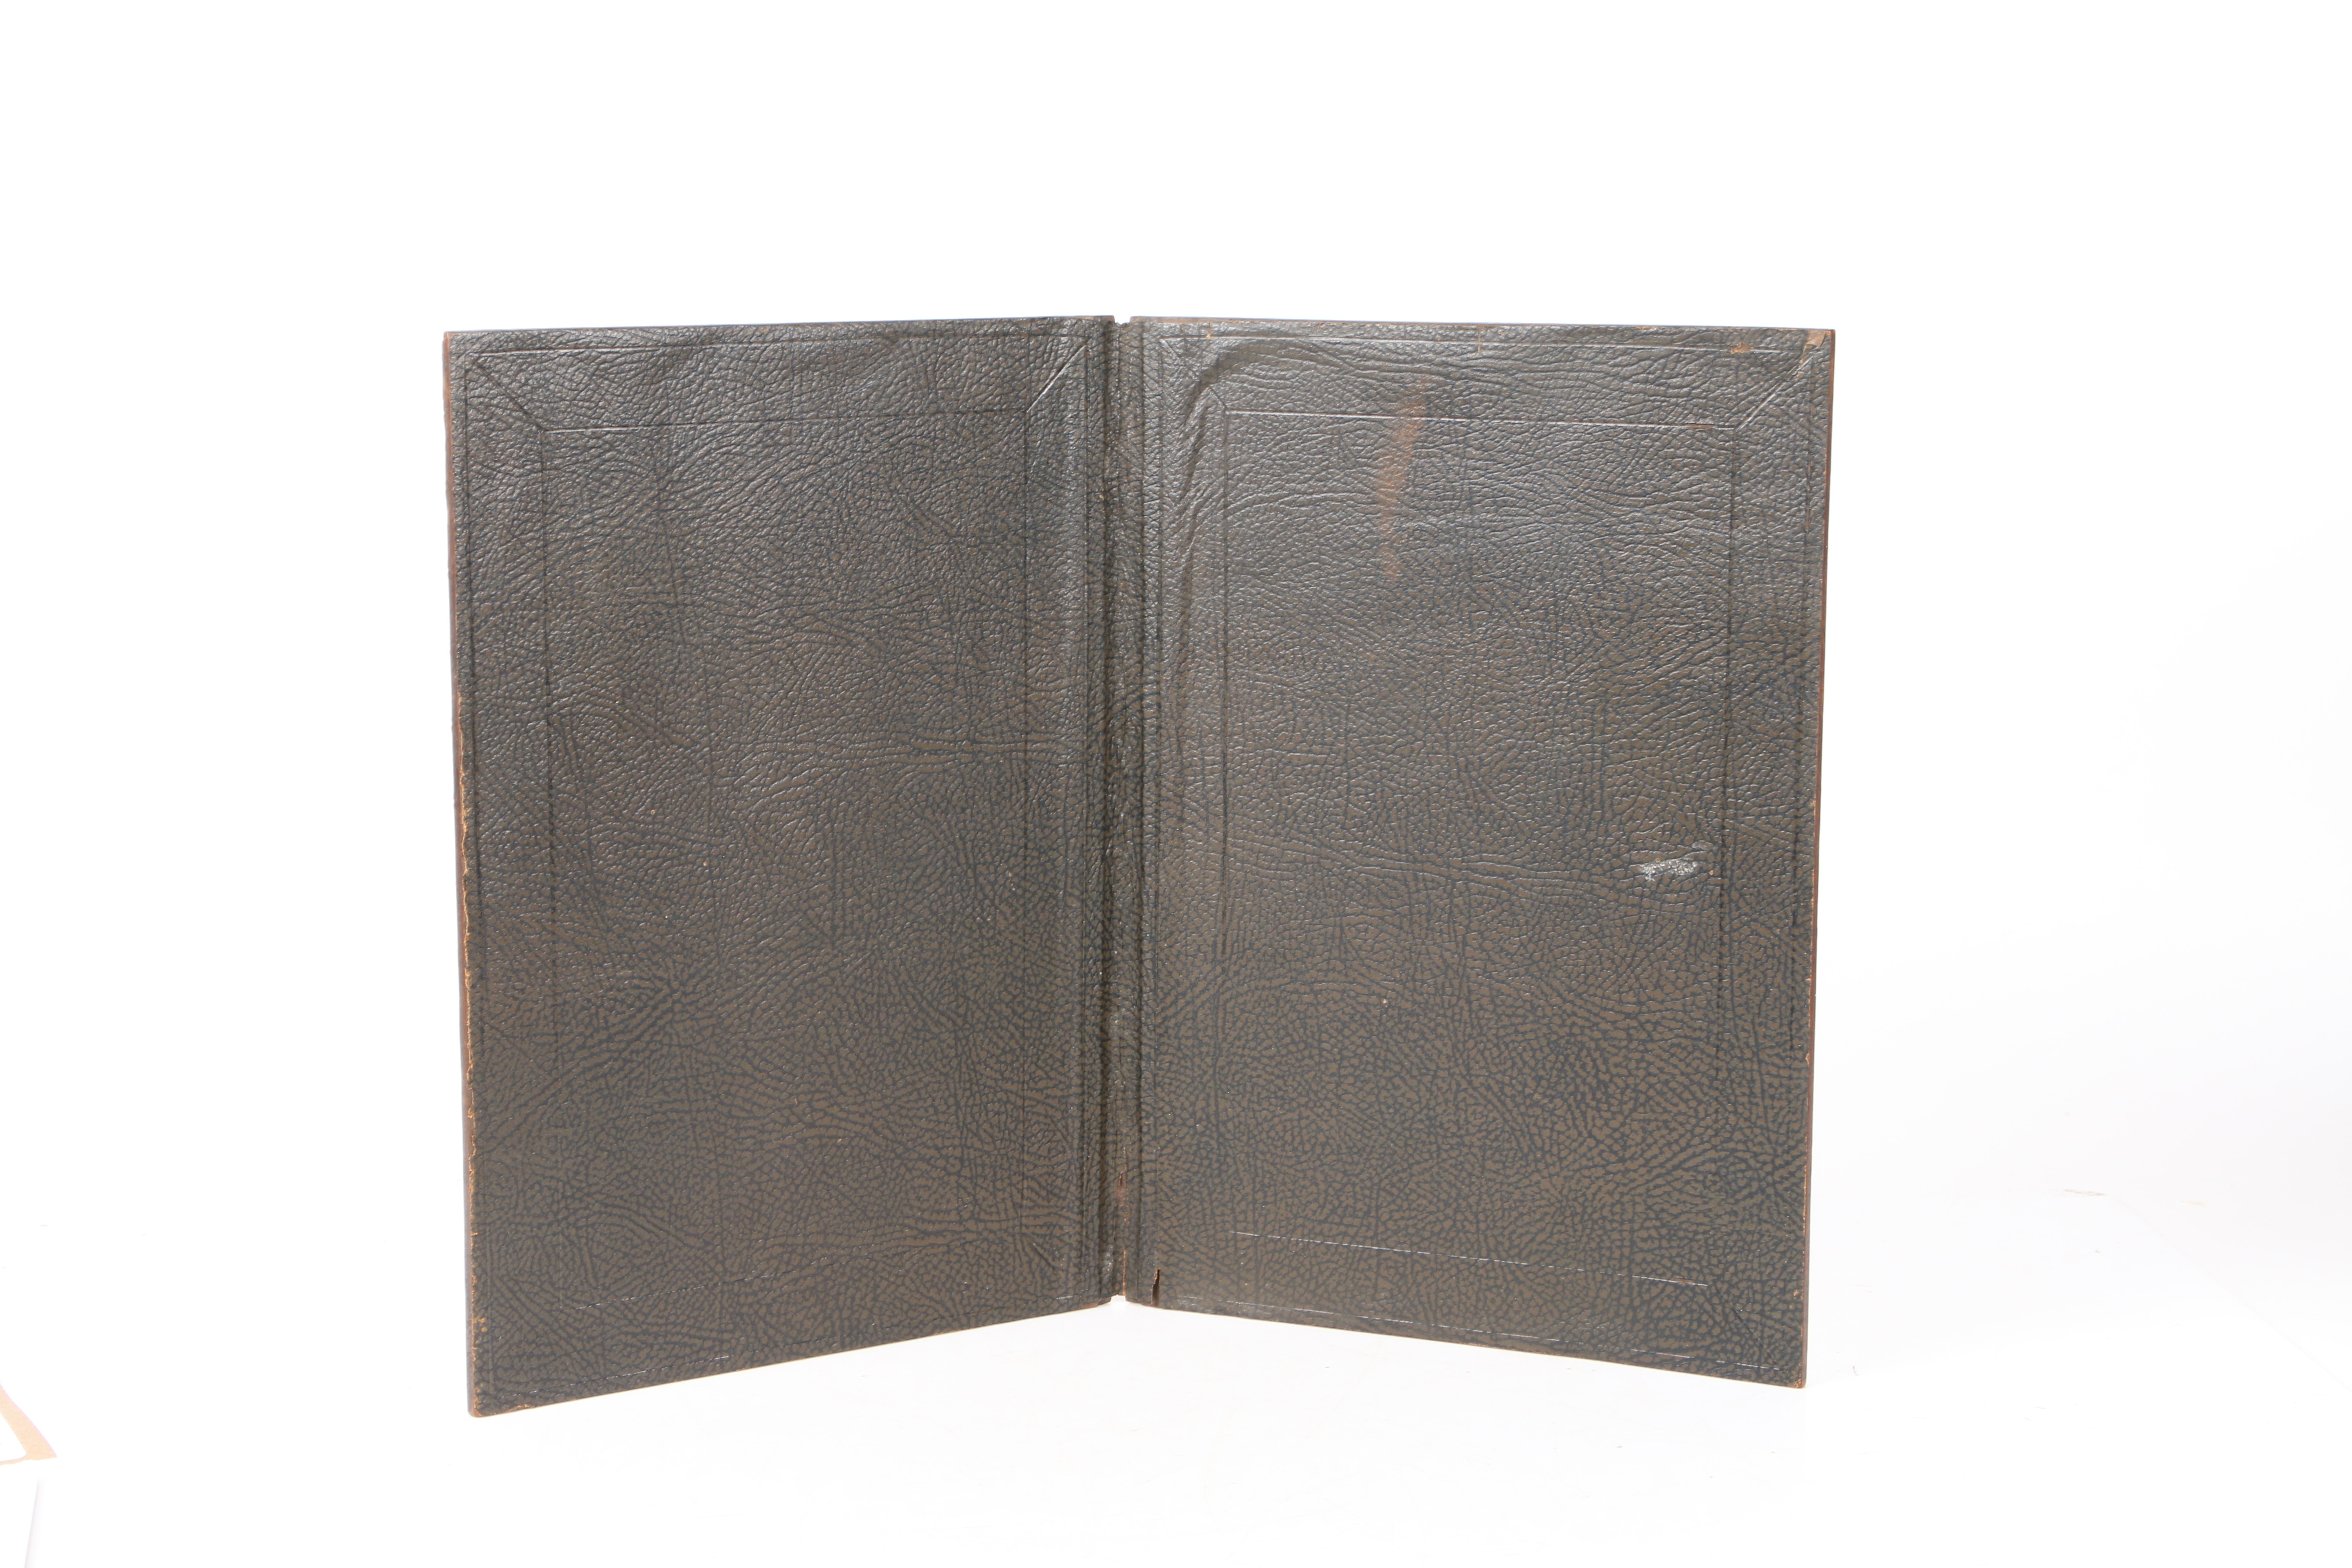 A 19TH CENTURY ANGLO INDIAN HARDWOOD BOOK COVER. - Image 2 of 4